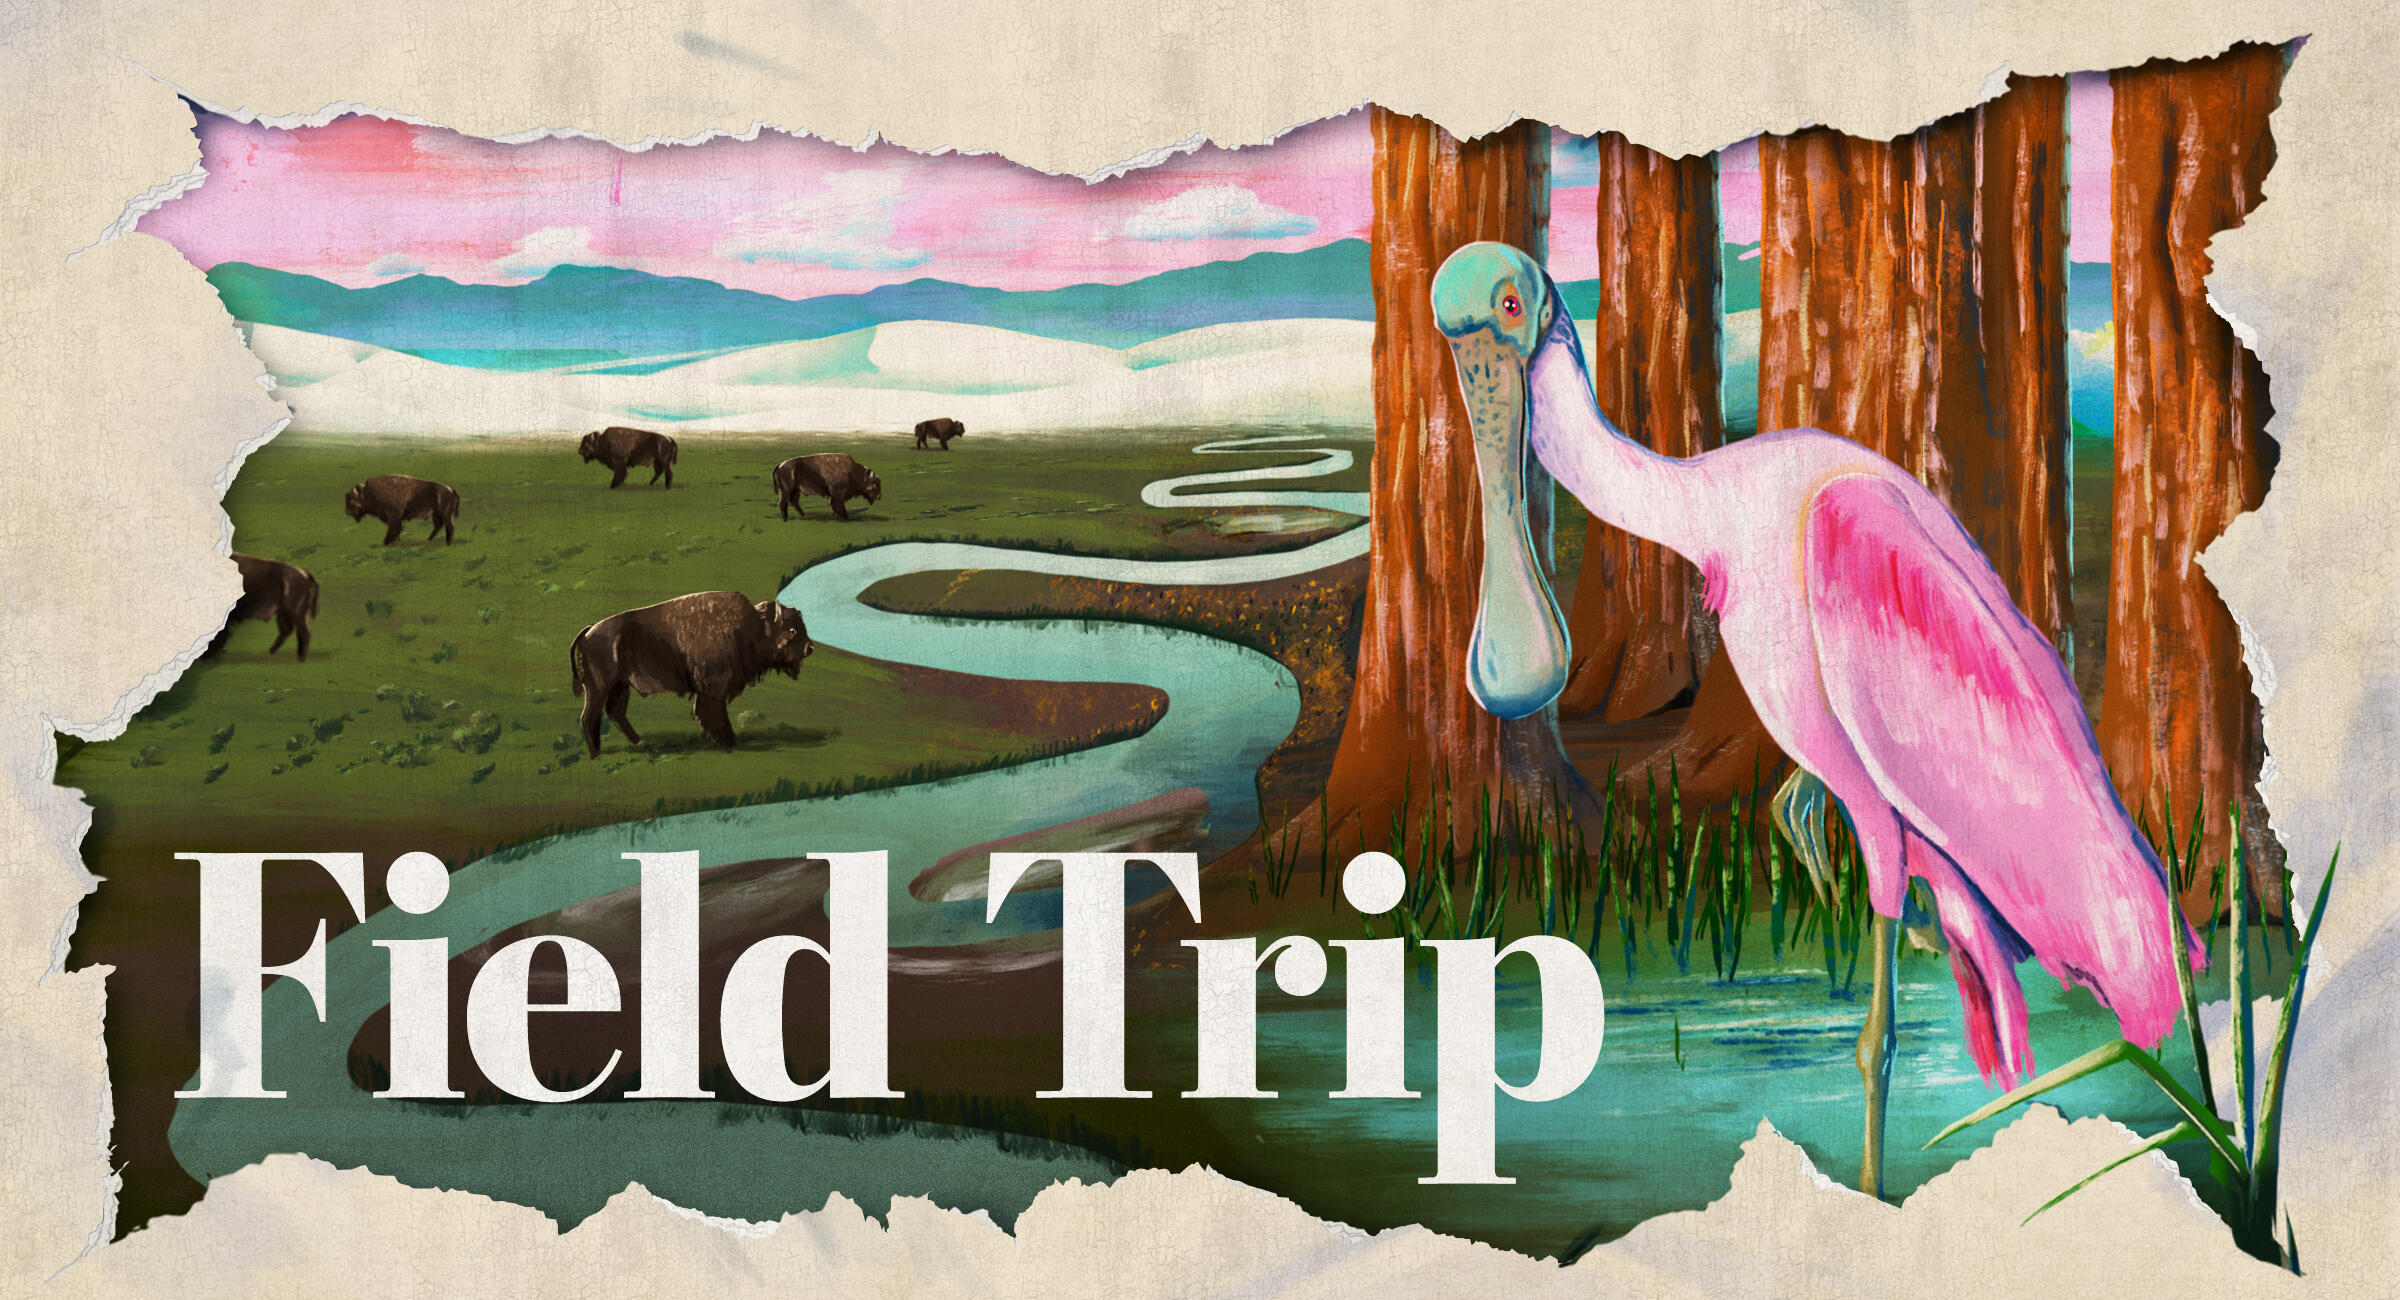 An artistic rendering of a Roseate Spoonbill in front of a landscape, with a bison in the background.